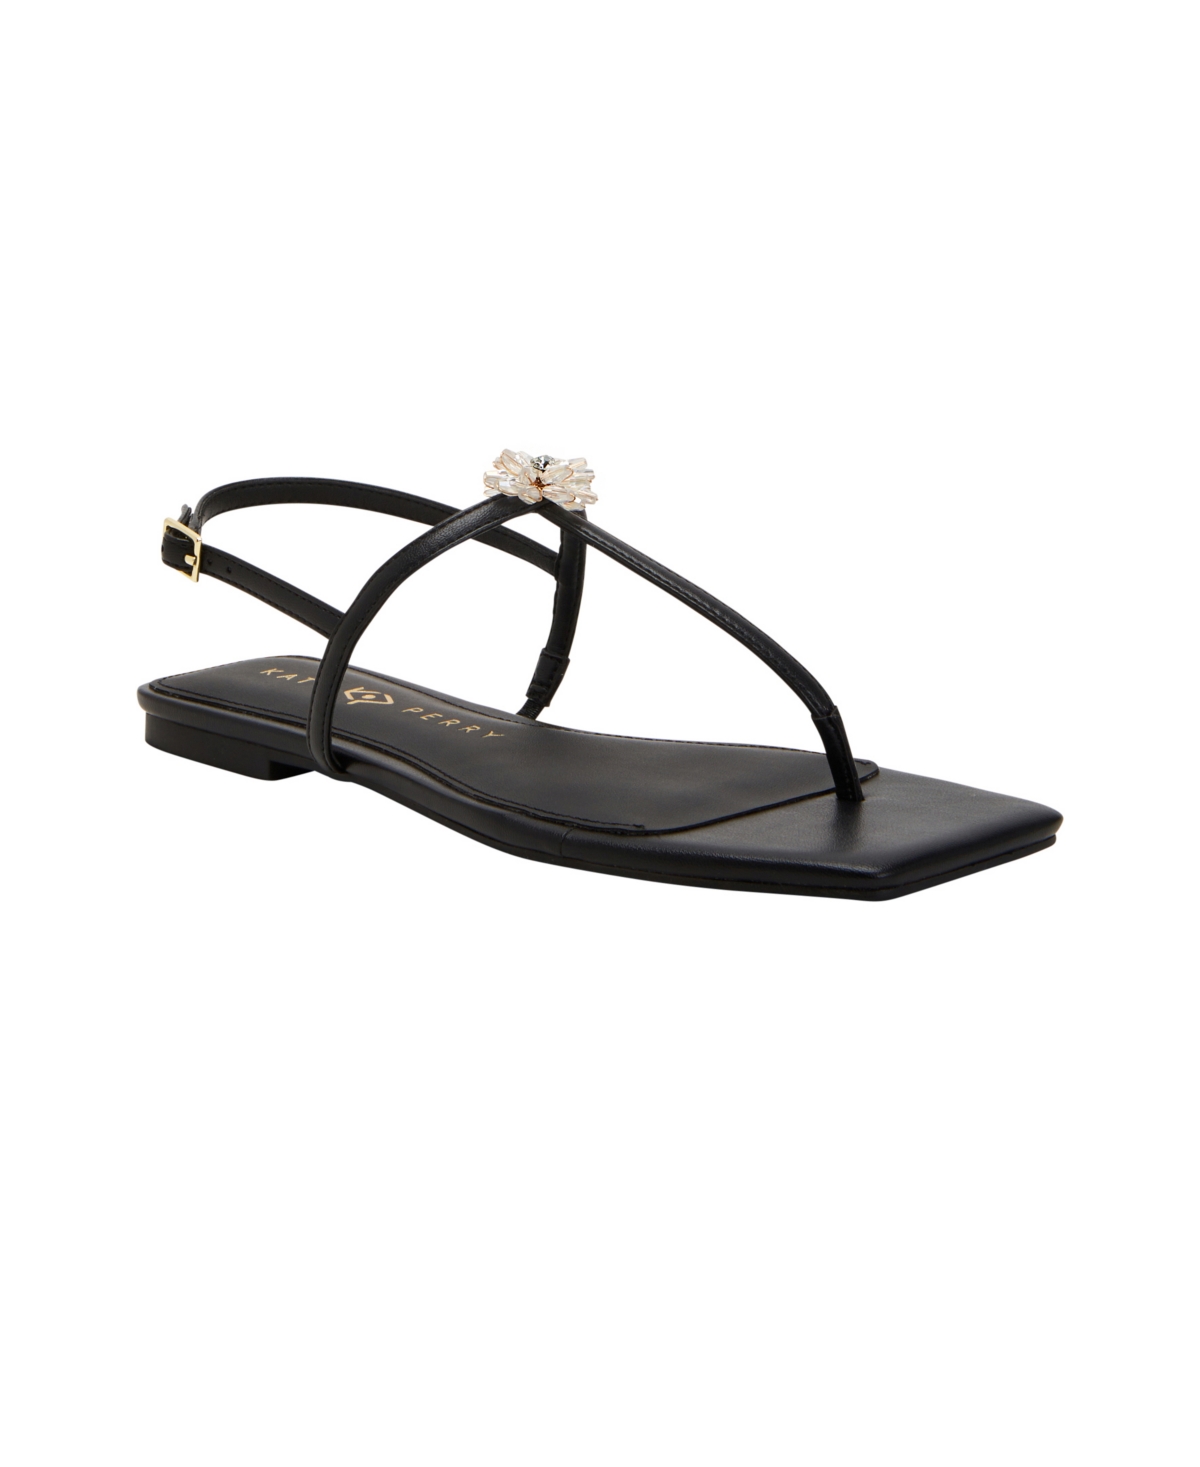 The Camie T-Strap Thong Sandal - Pineapple